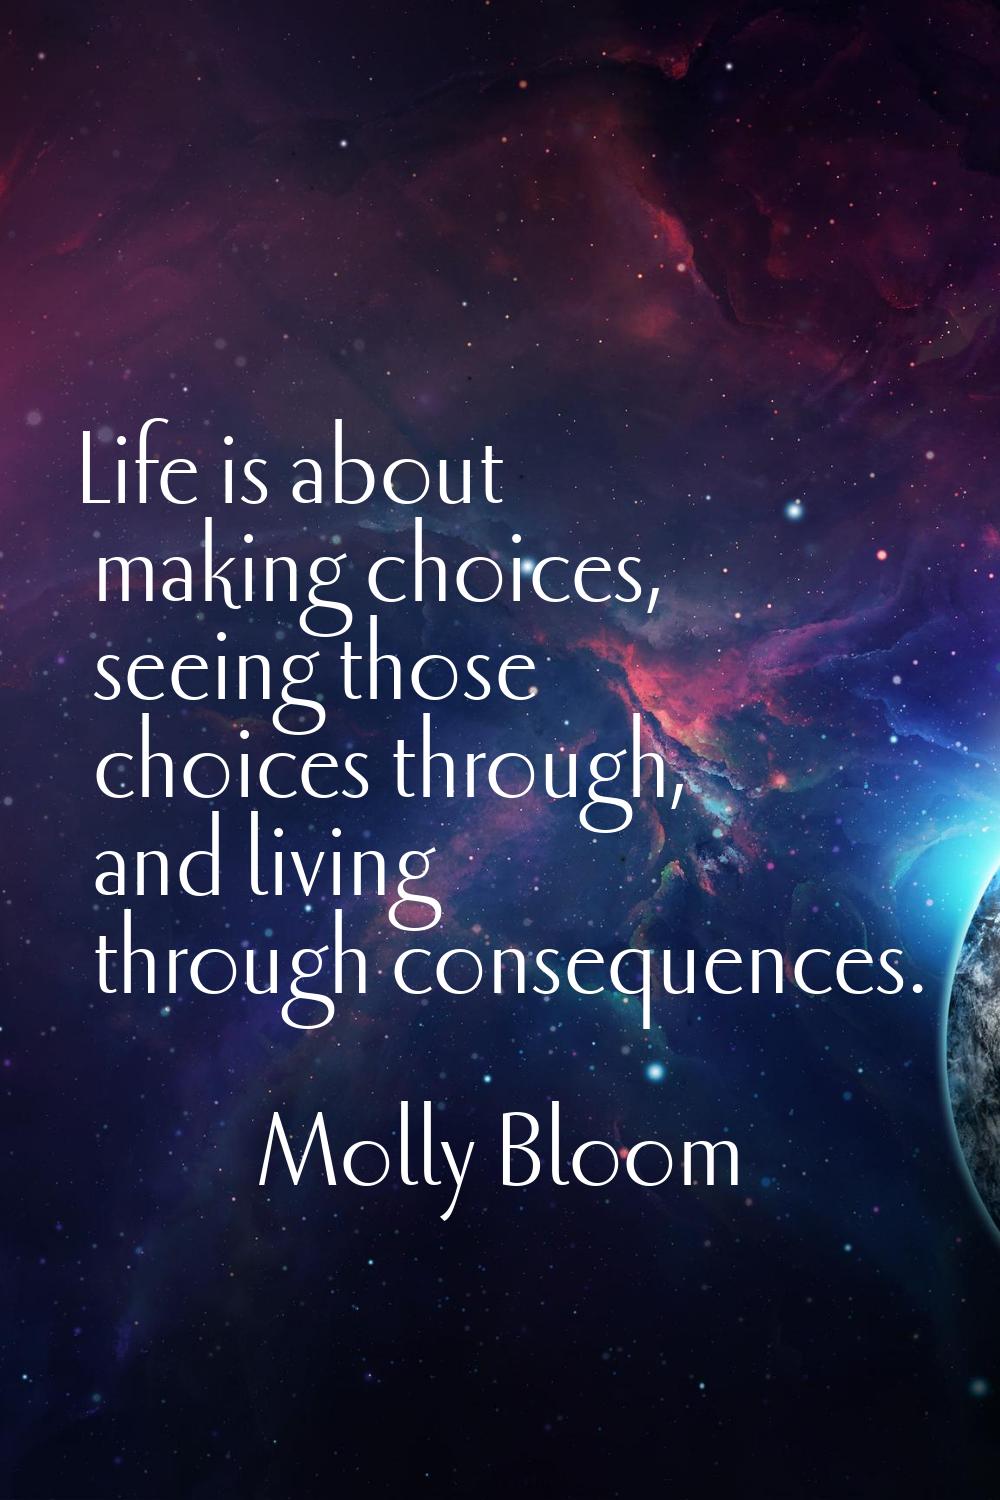 Life is about making choices, seeing those choices through, and living through consequences.